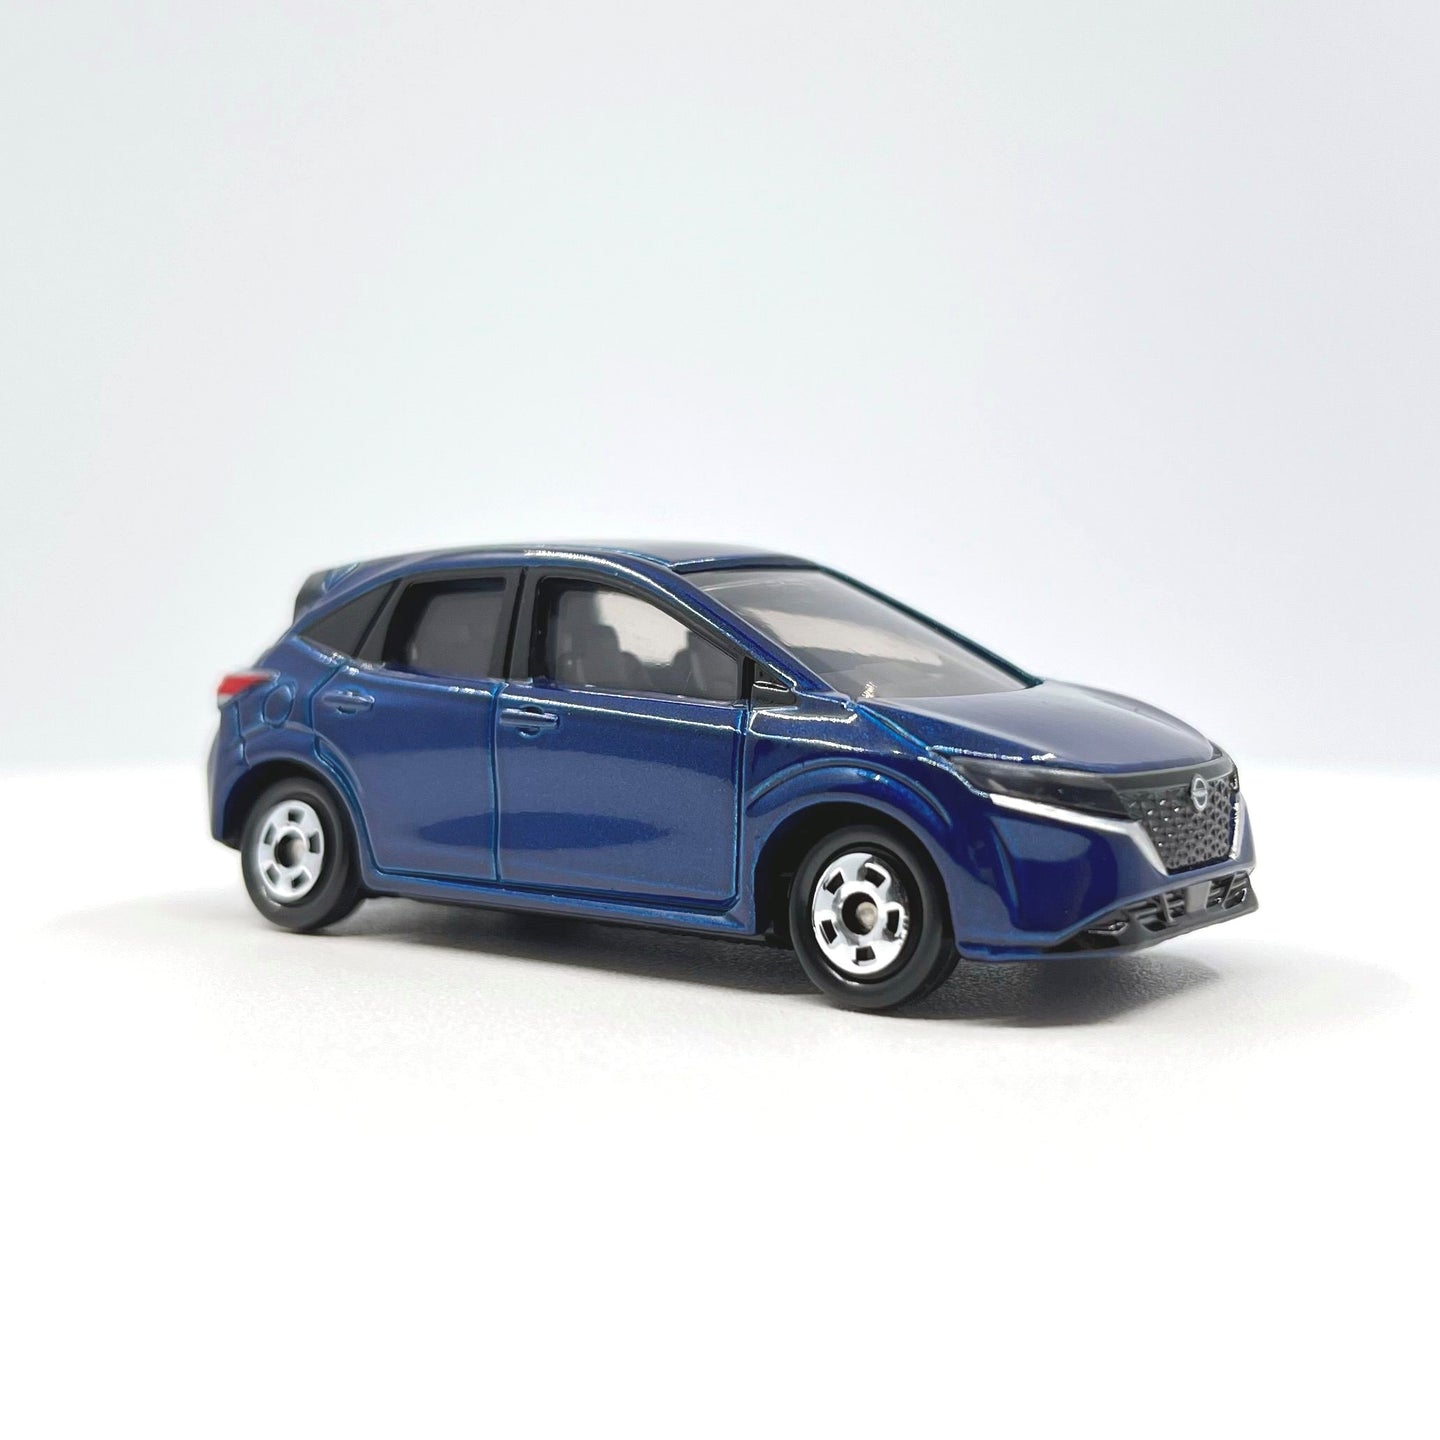 1:63 Nissan Note Alloy Tomica Diecast Car Model by Takara Tomy